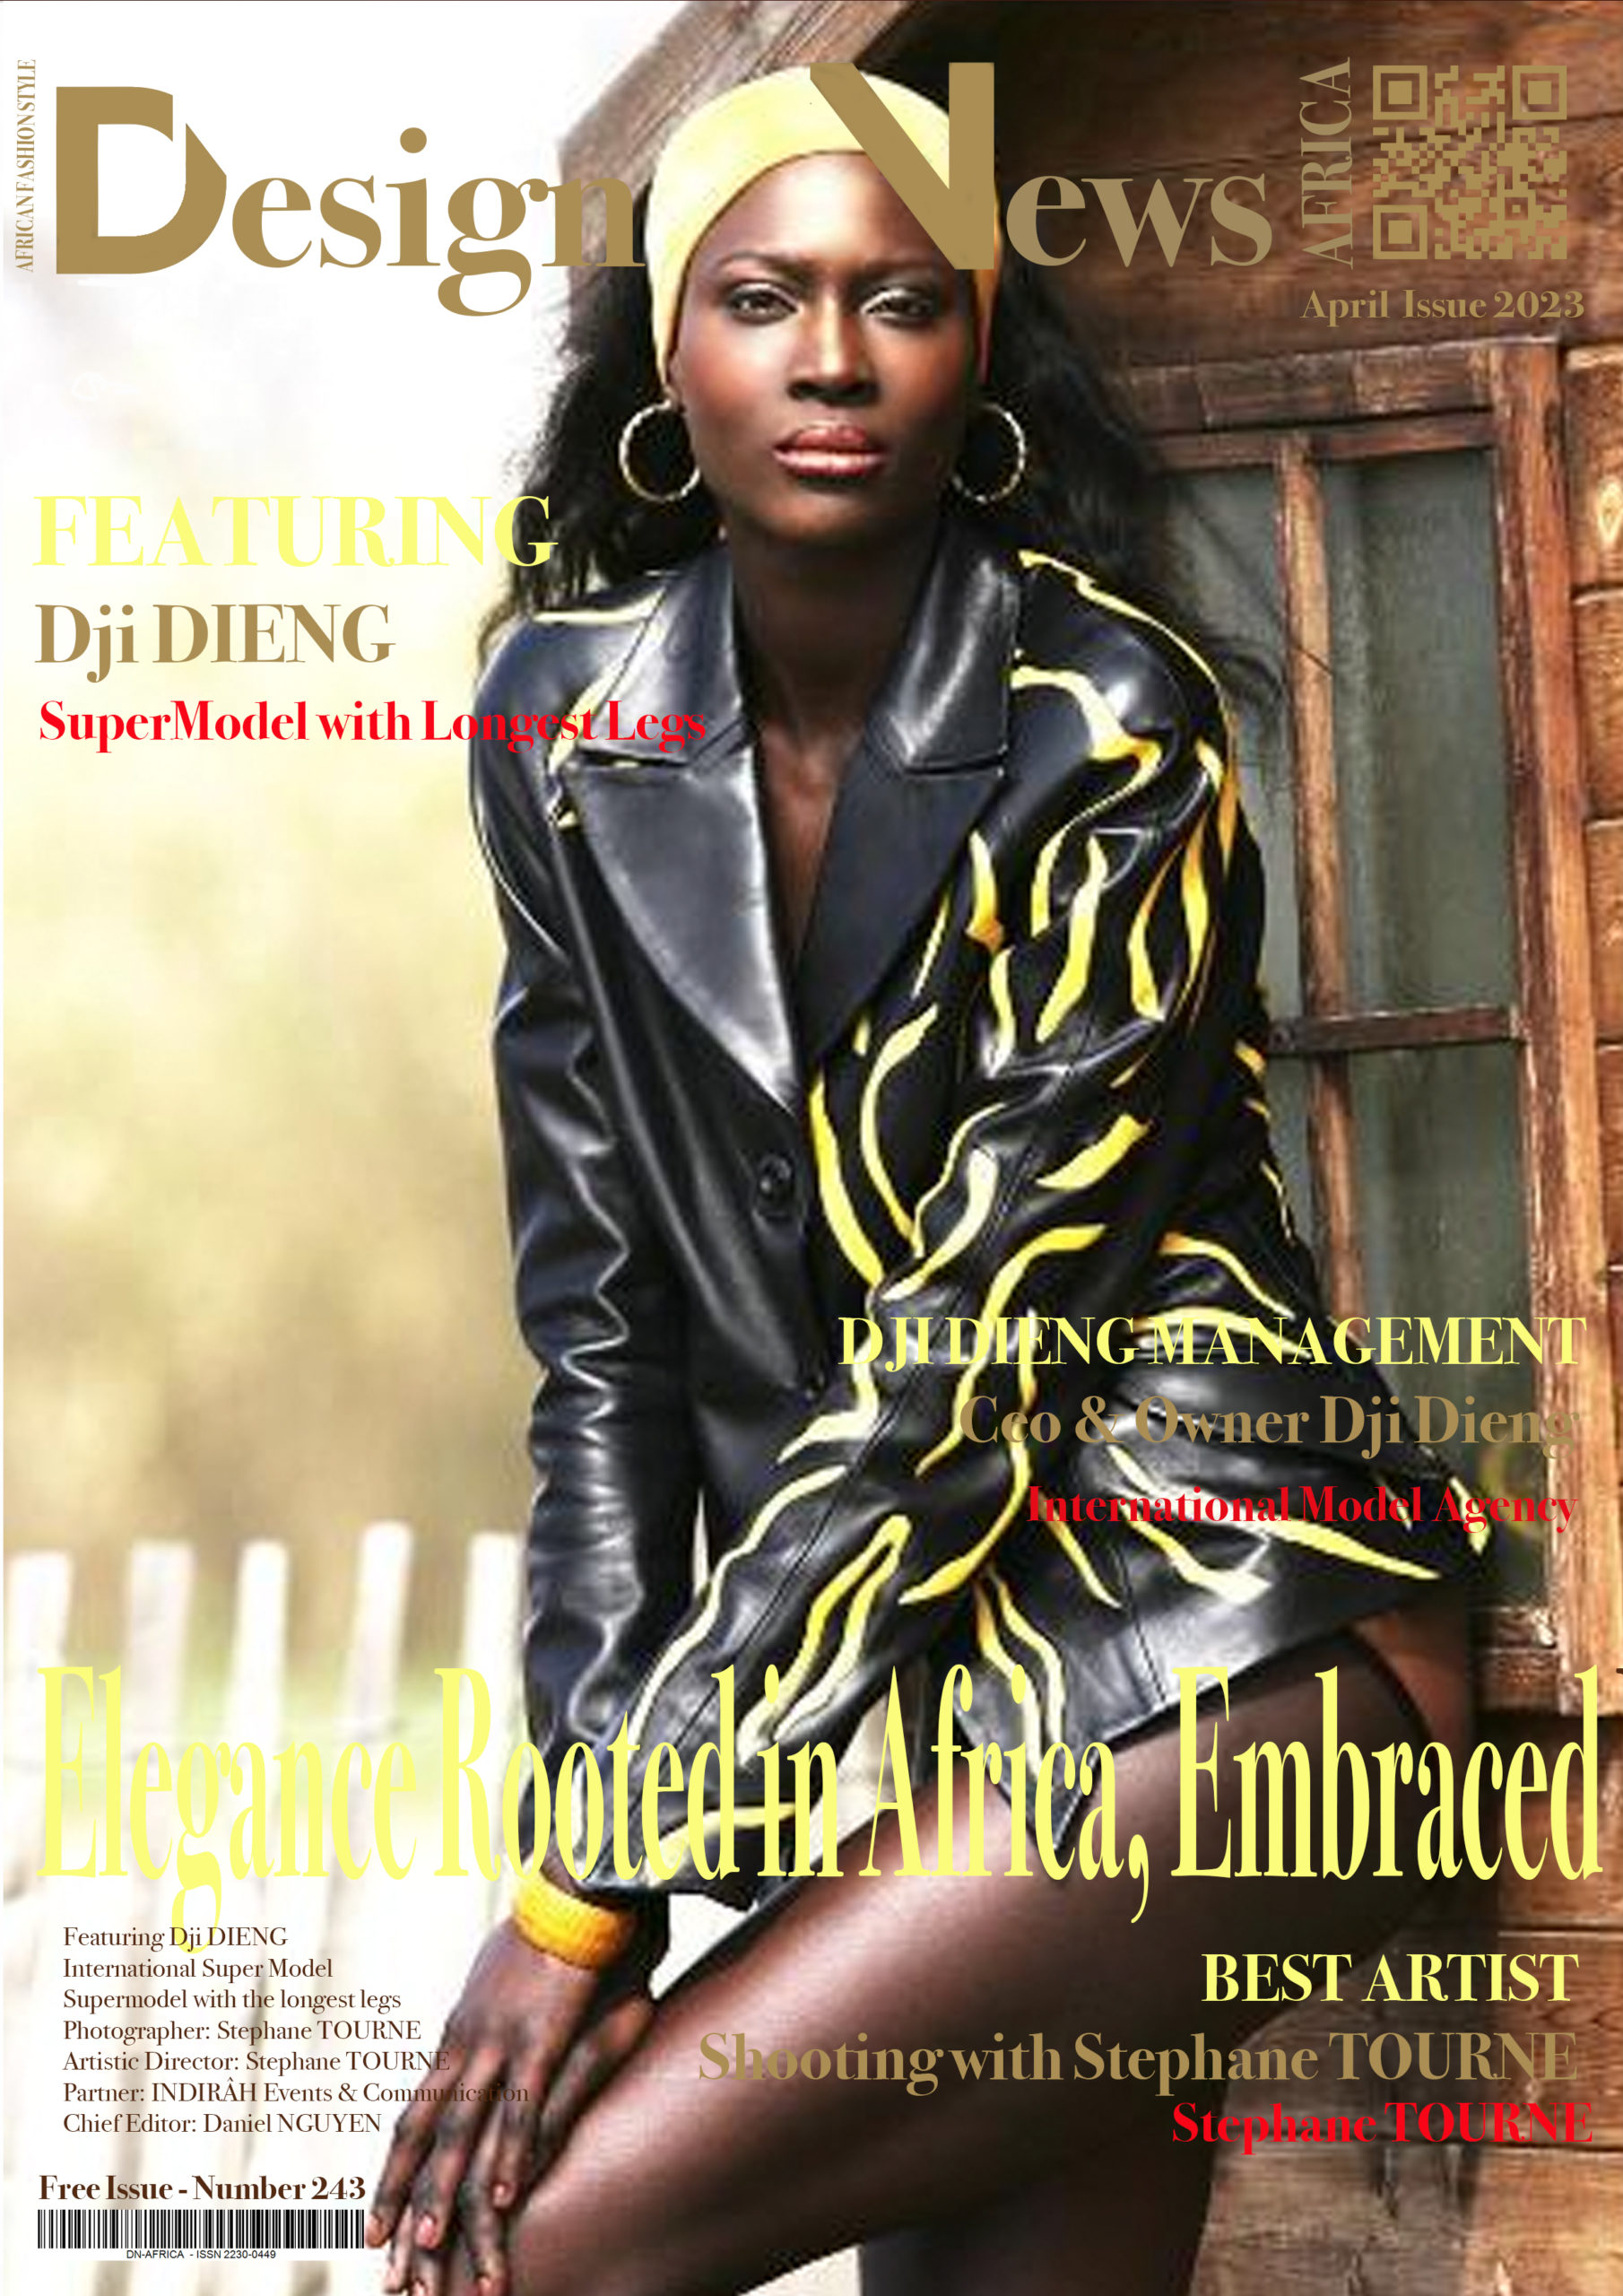 AFRICA-FASHION-STYLE-2490X3508-DN-AFRICA-COVER-NUMBER-243-APRIL-24TH-2023-DJI-DIENG-SUPER-MODEL-DN-AfrICA-Media-Partner